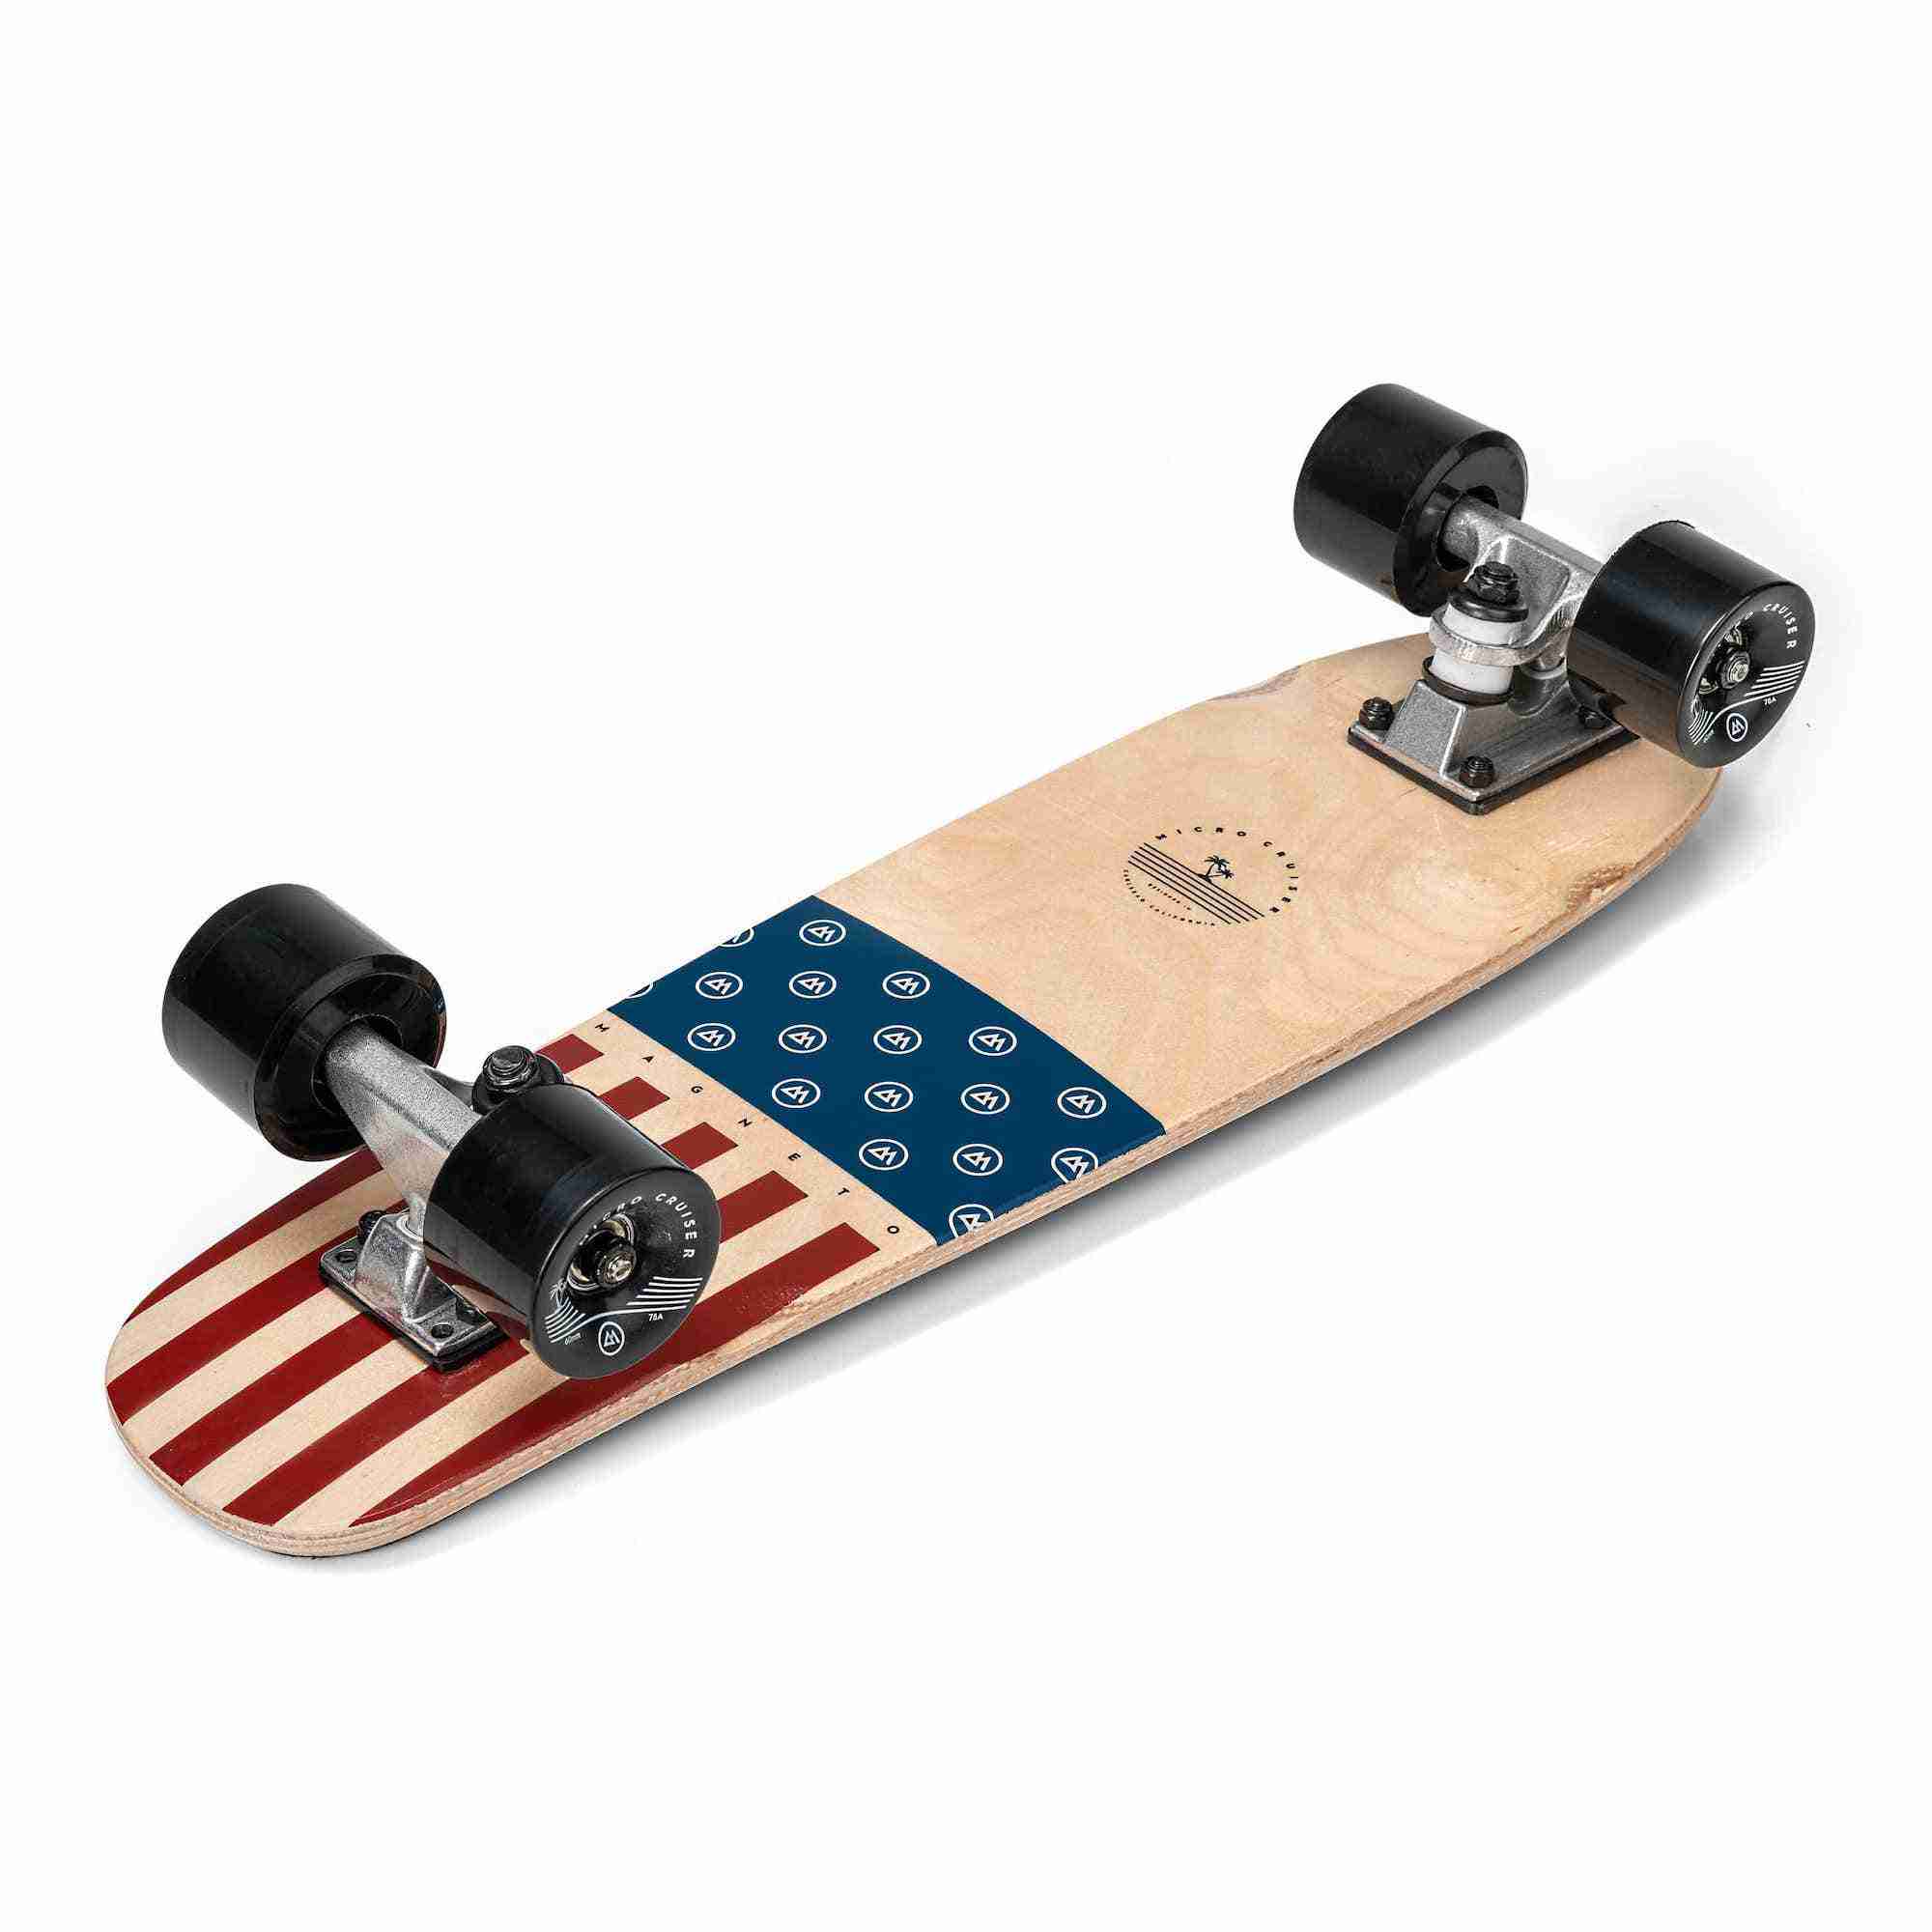 skateboards with discount code